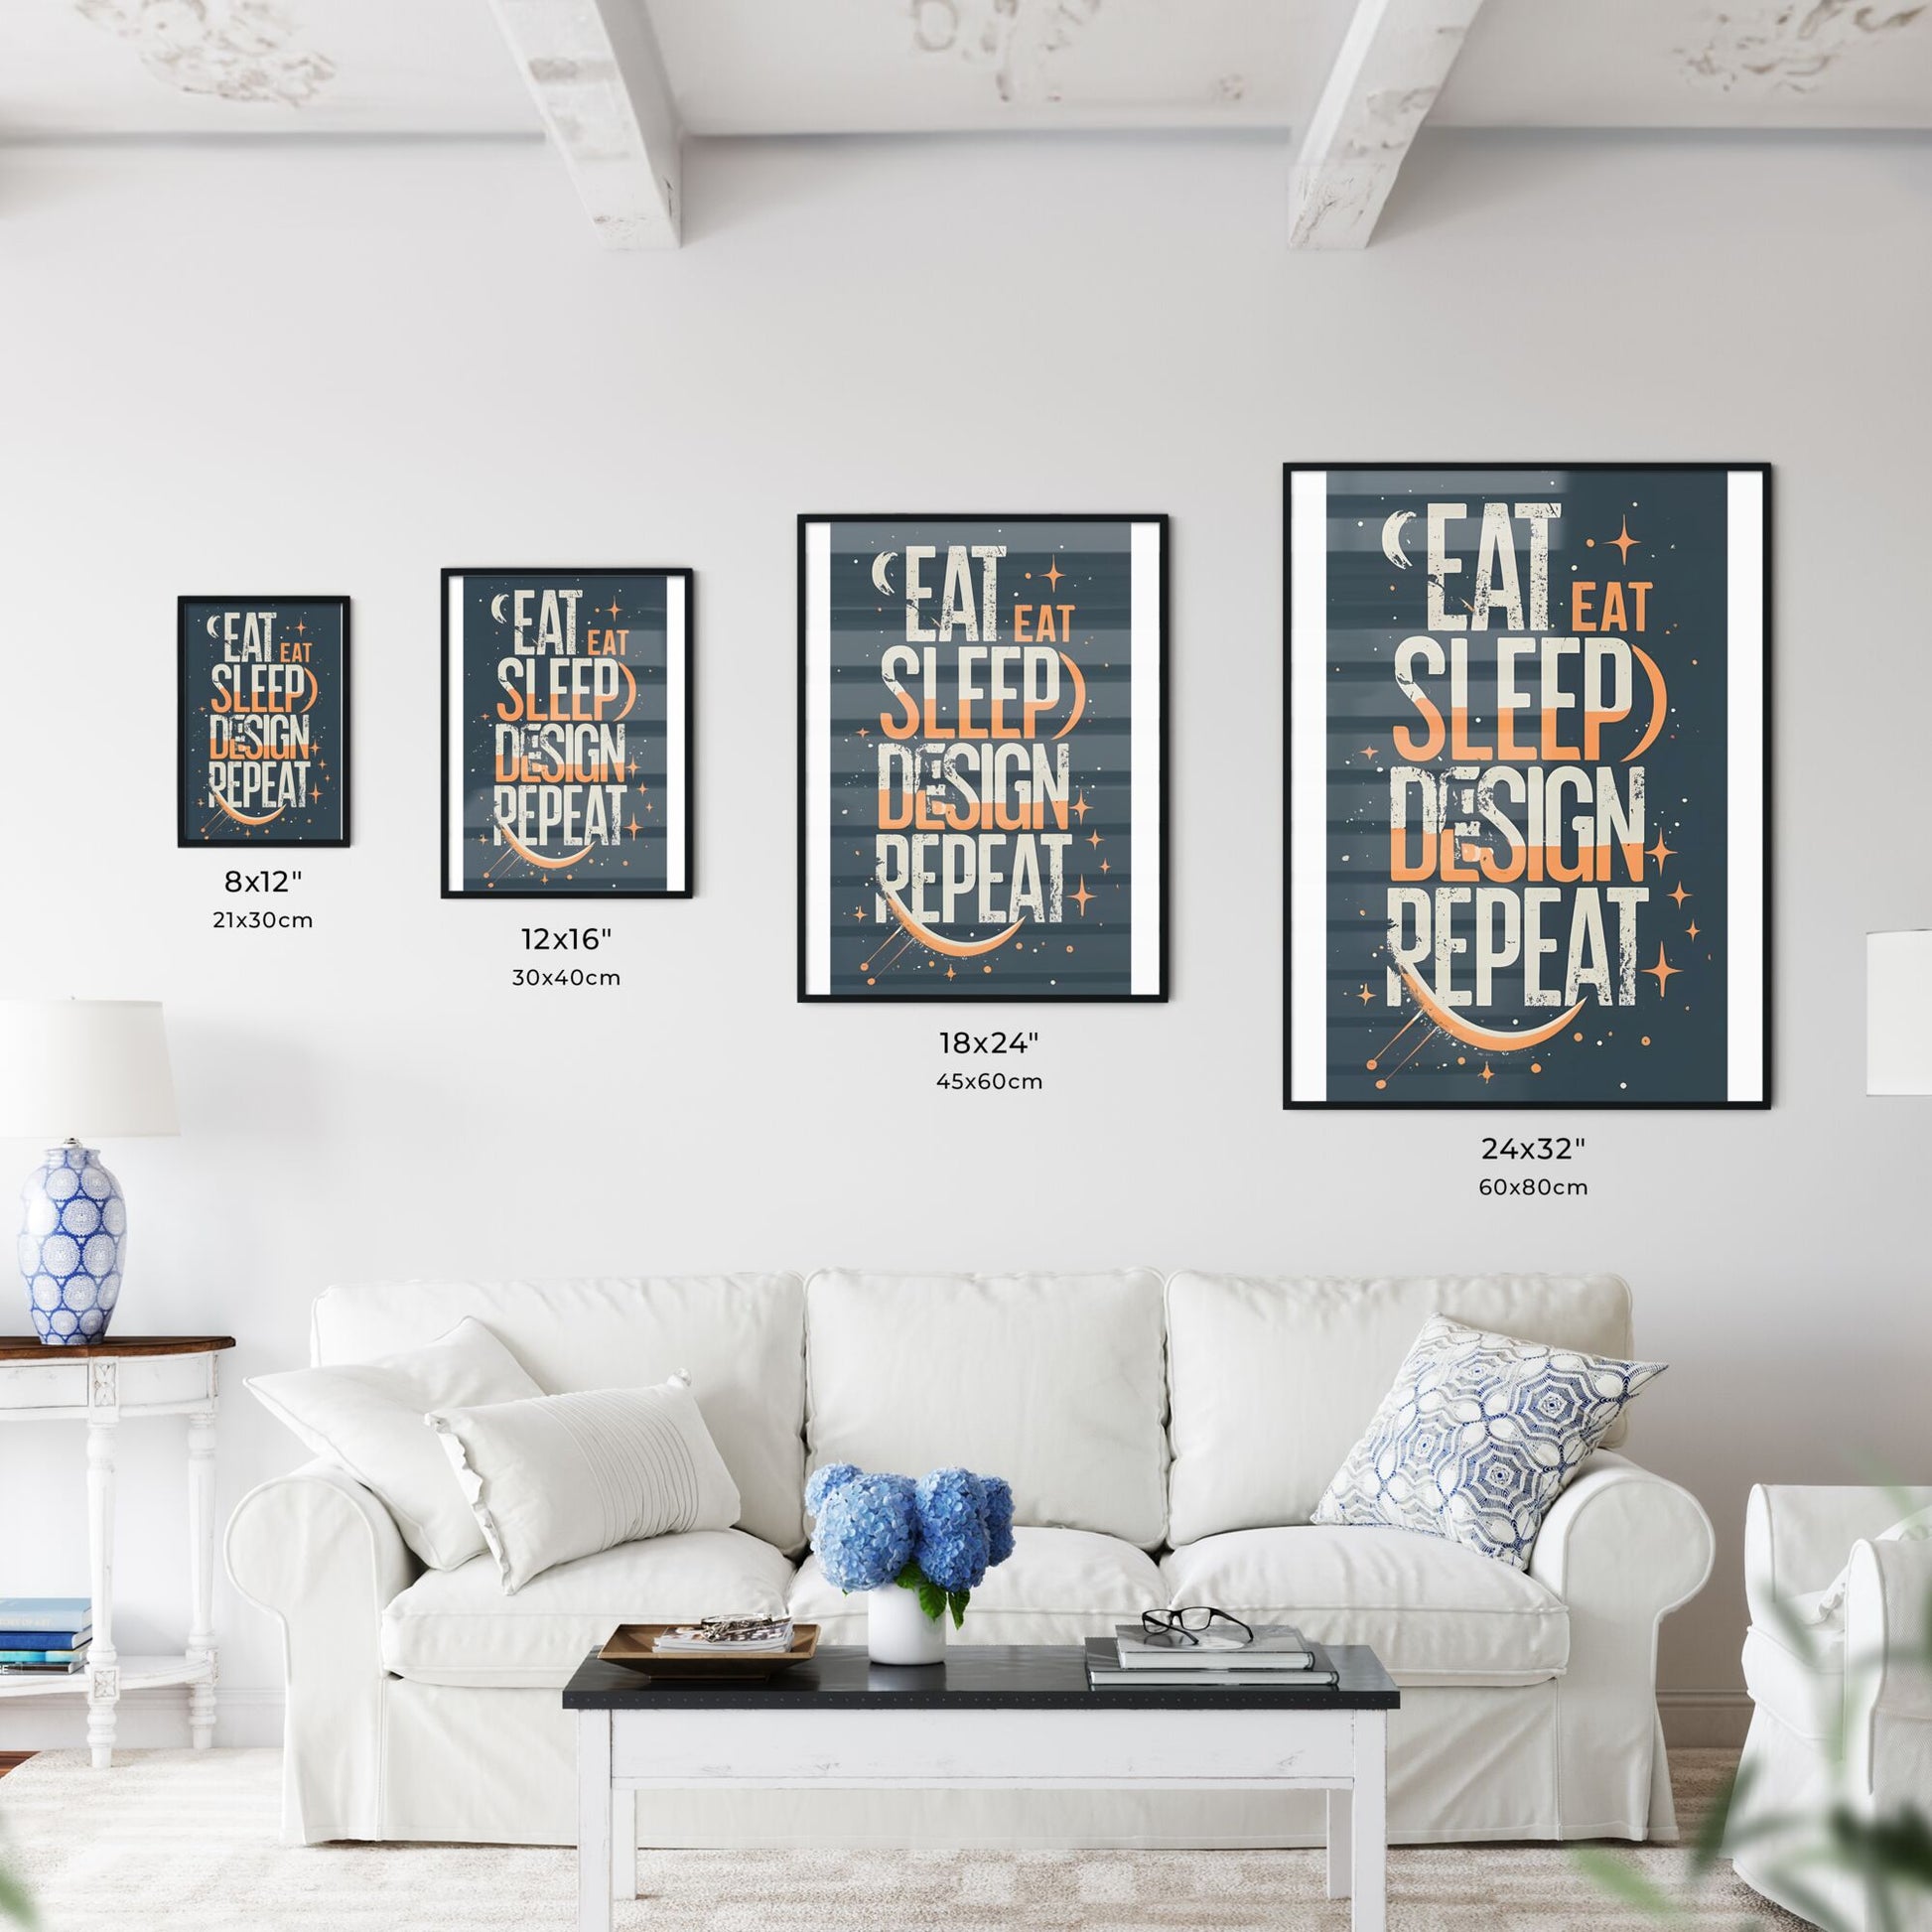 Eat, Sleep, Design, Repeat - A Poster With Text On It Art Print Default Title